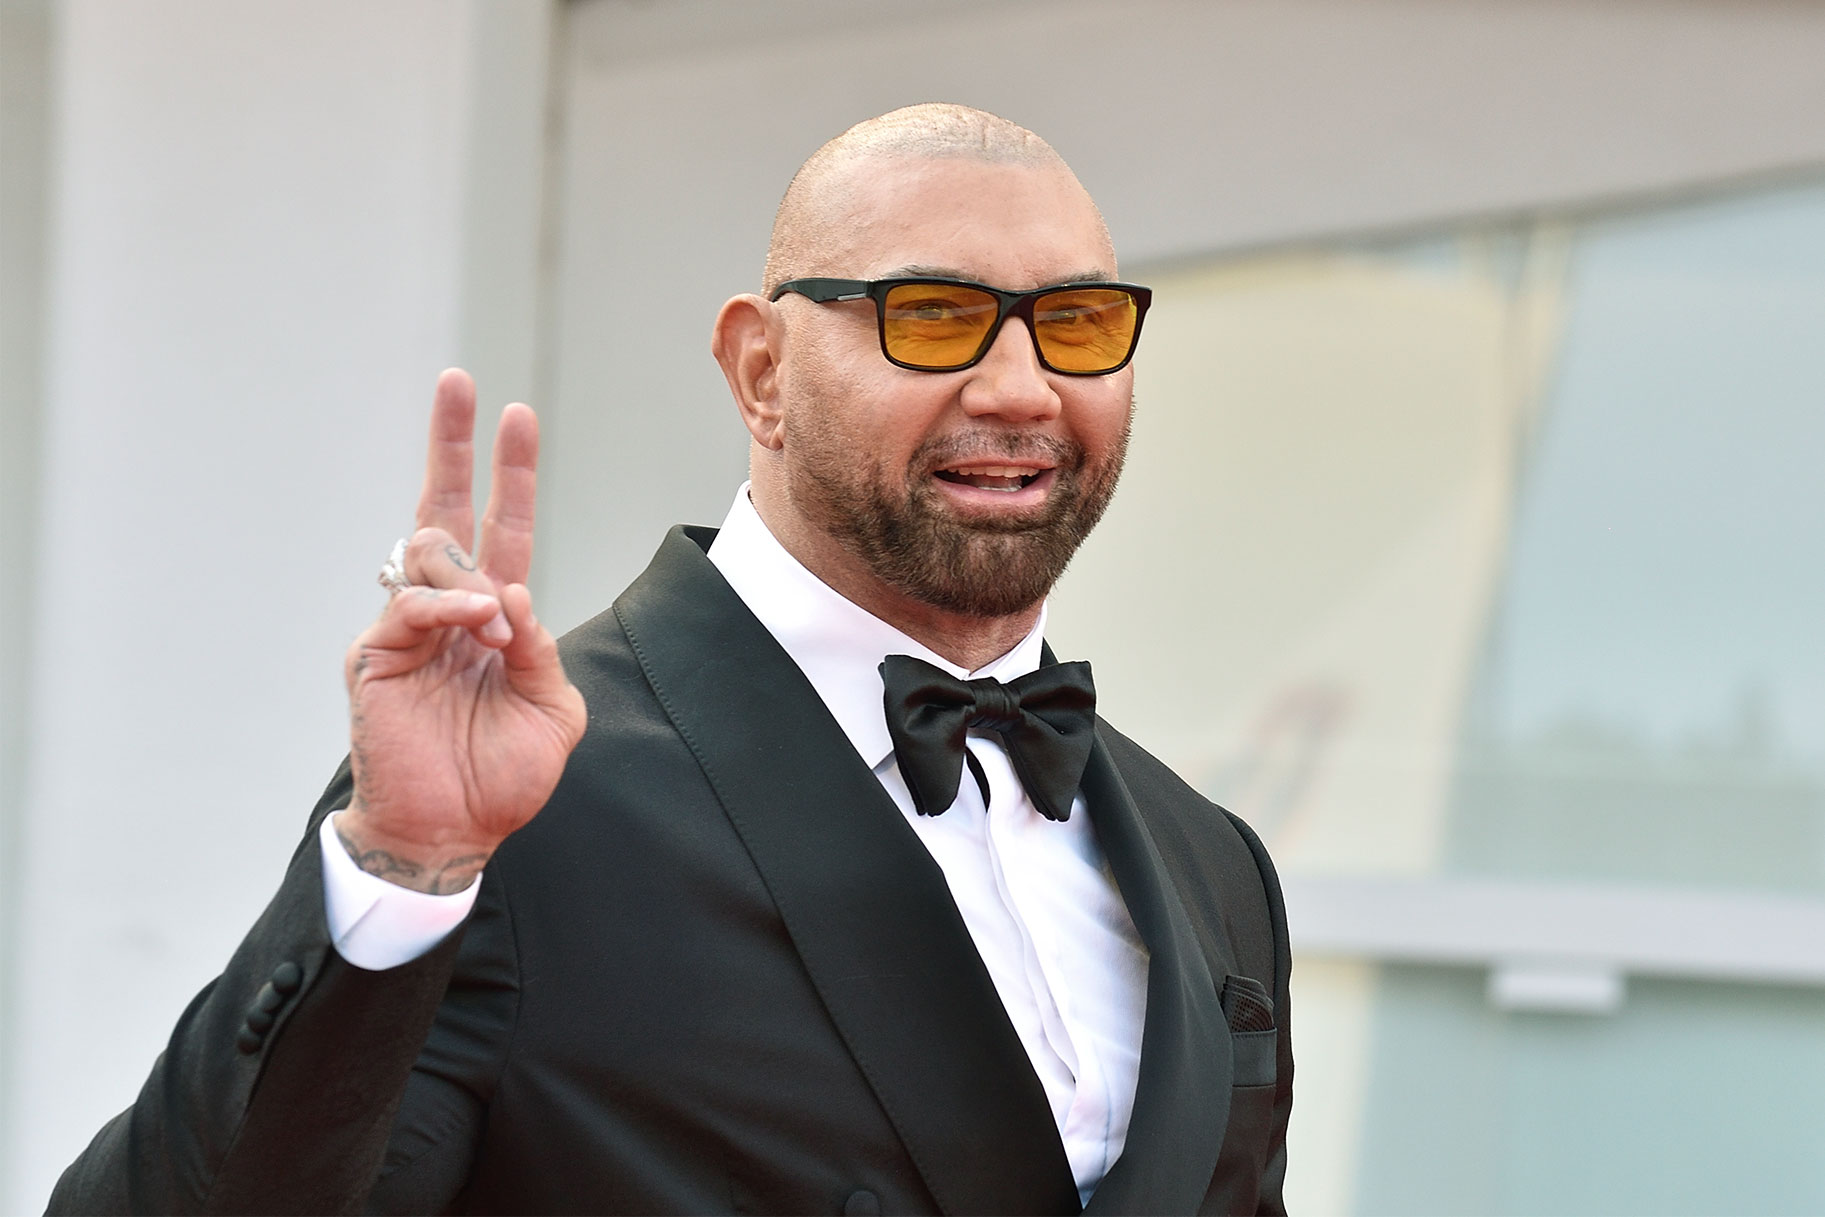 Batista like you've never seen him before: photos